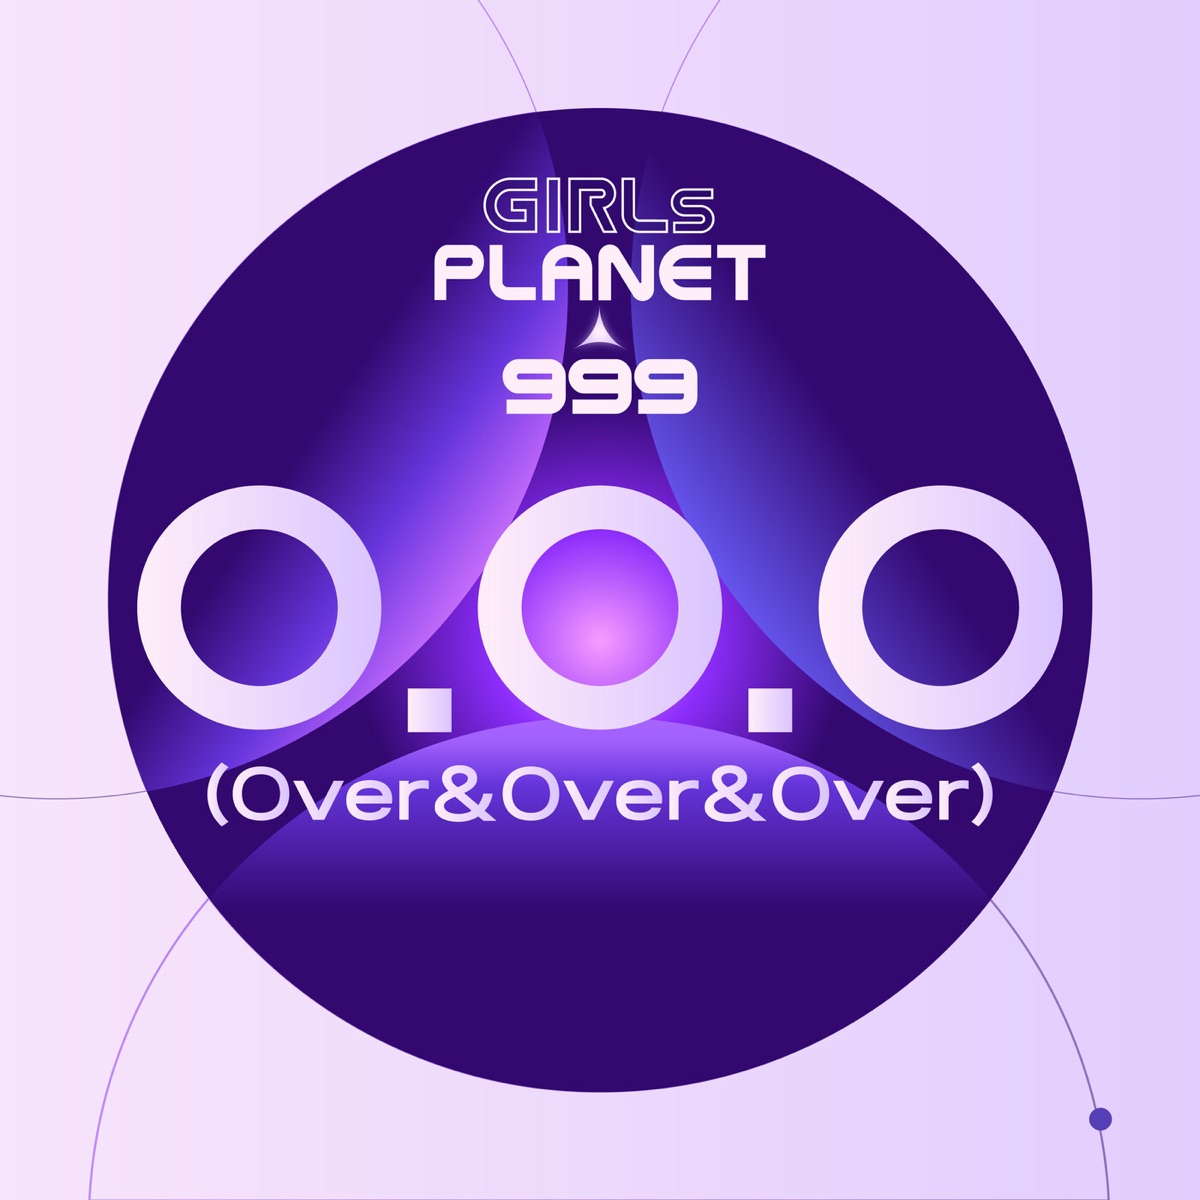 Cover for『Girls Planet 999 - O.O.O (Over&Over&Over)』from the release『Girls Planet 999 - O.O.O (Over&Over&Over)』